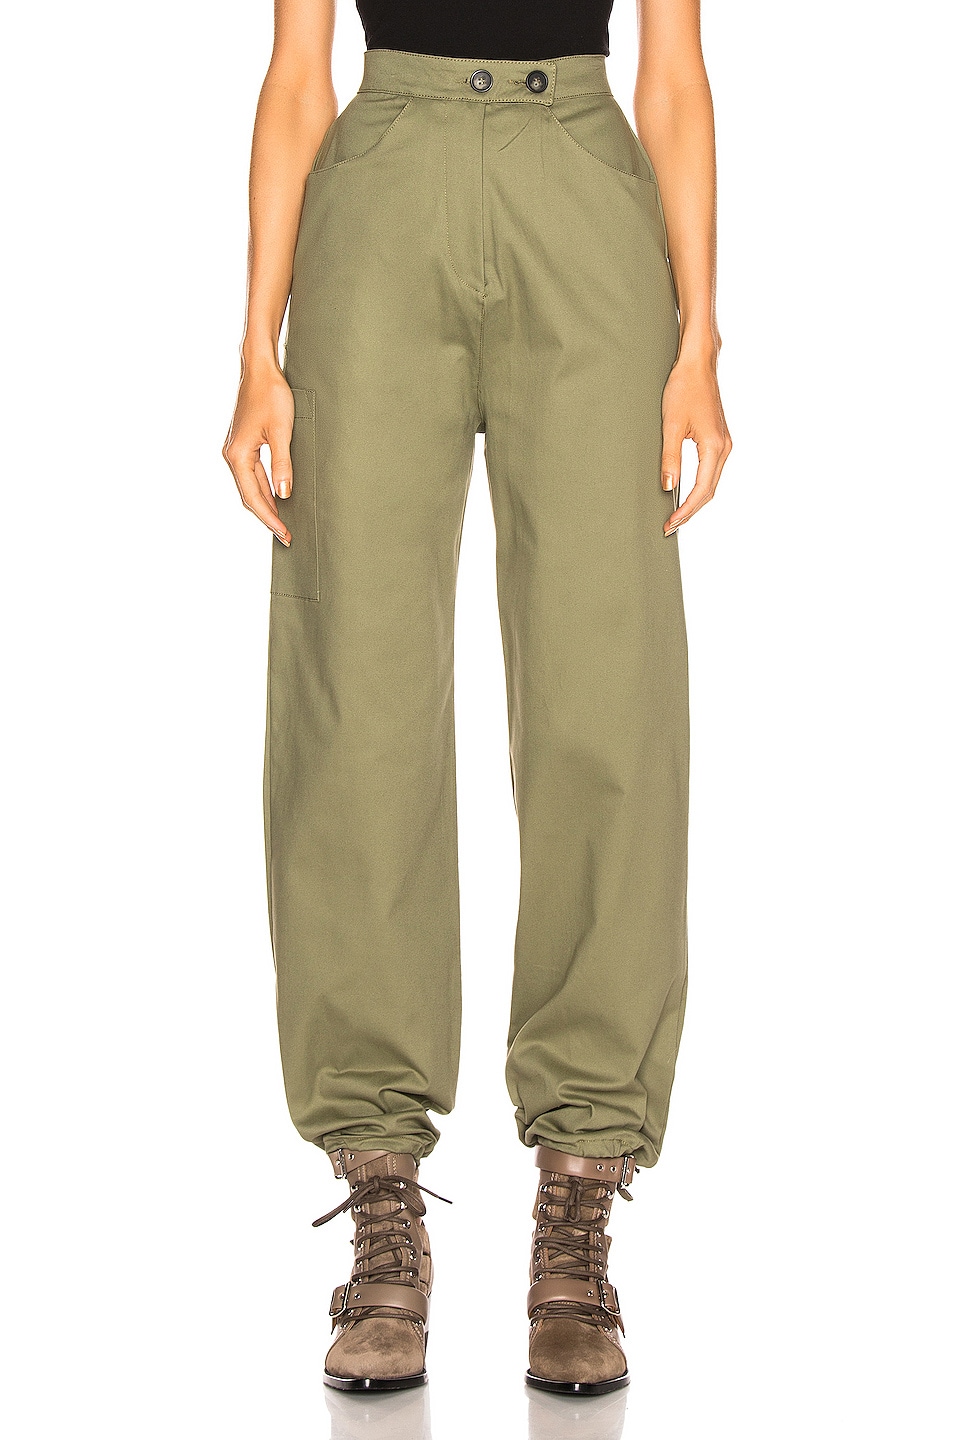 Image 1 of The Range Structured Cargo Pant in Fatigue